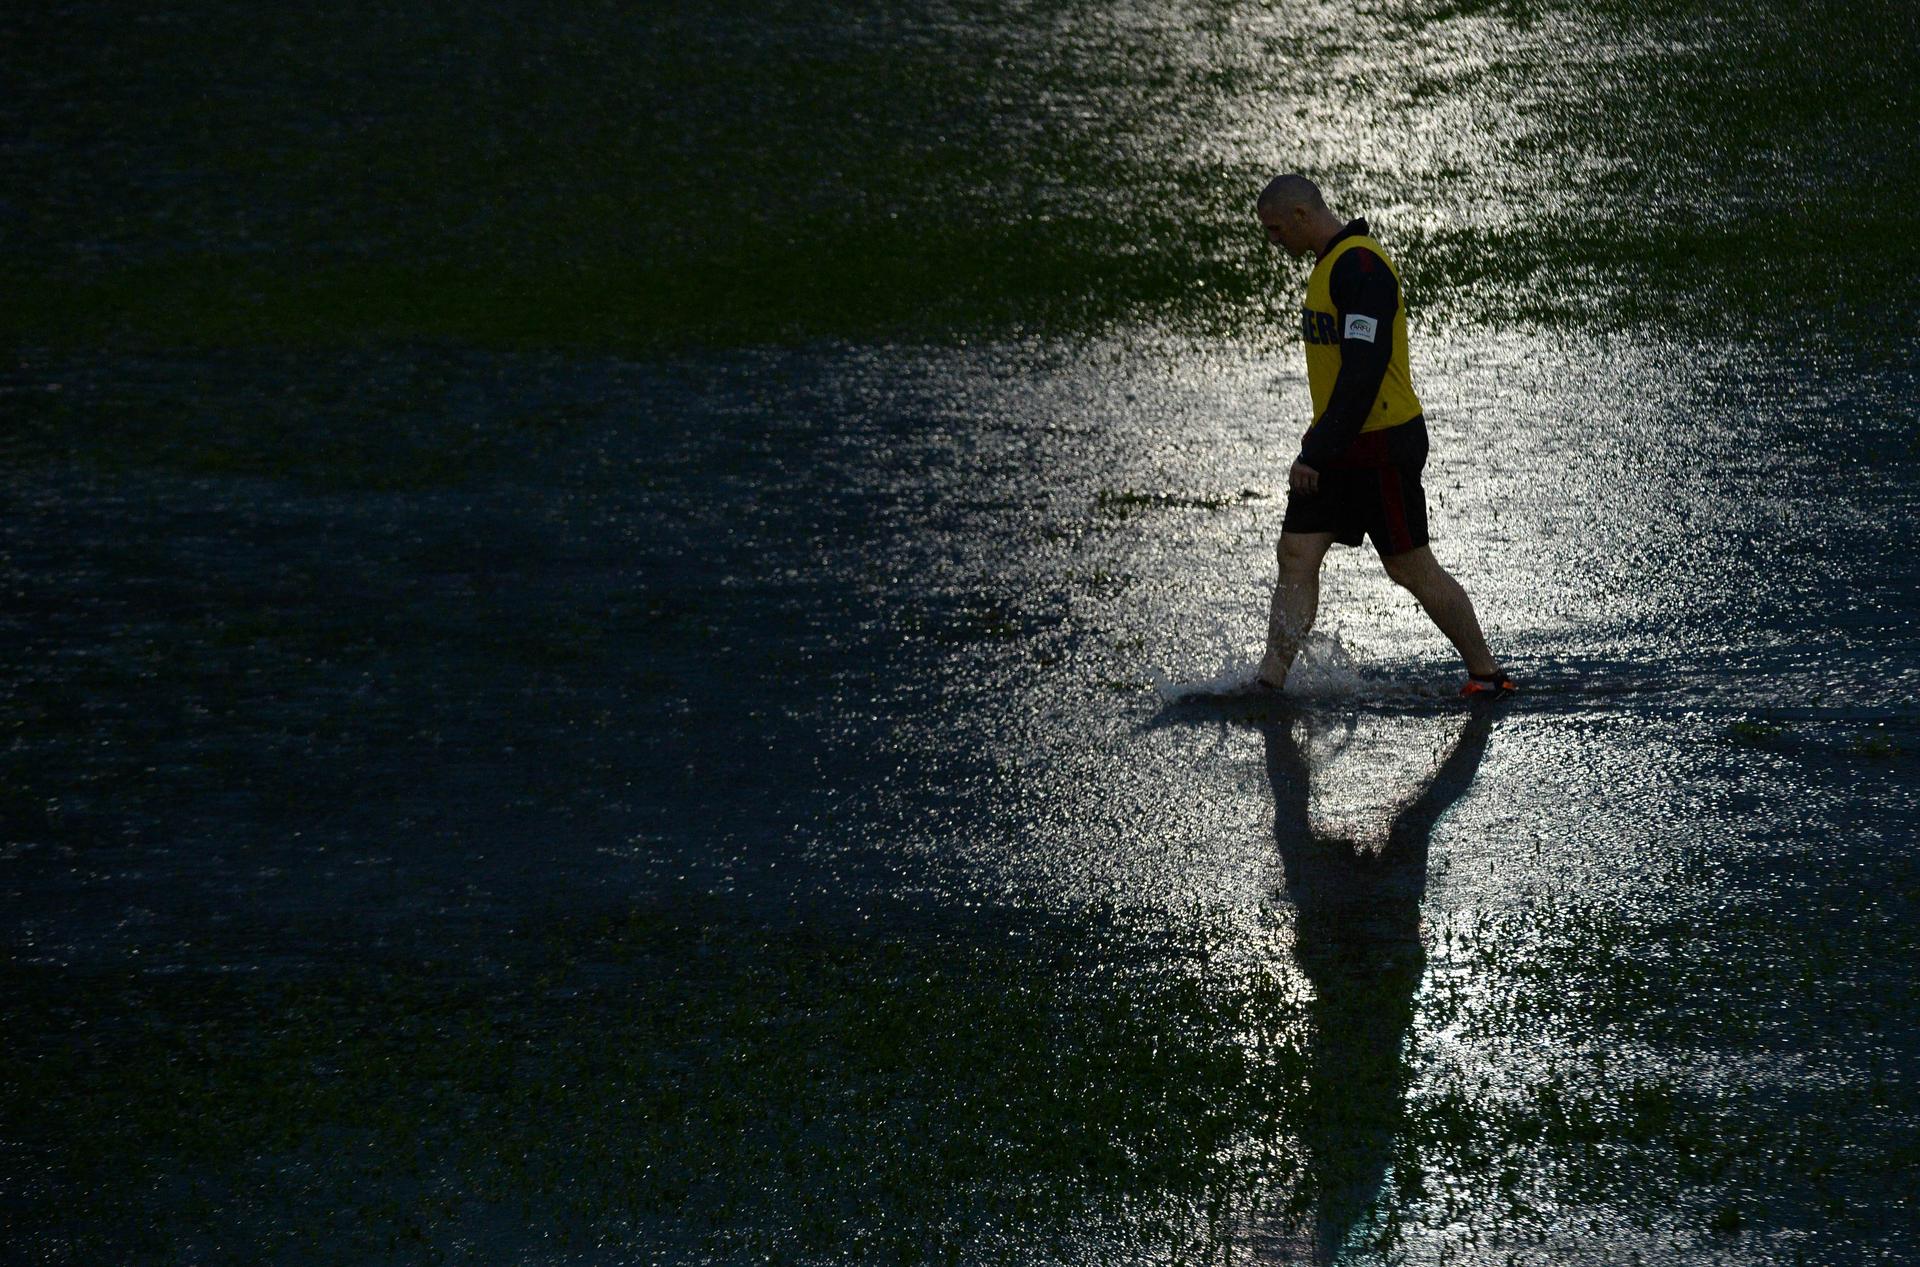 A trainer inspects the field during the Asia Rugby Championship clash between Hong Kong and Japan at Aberdeen. Officials eventually decided to abandon the match, which was halted after 13 minutes. Photo: AFP